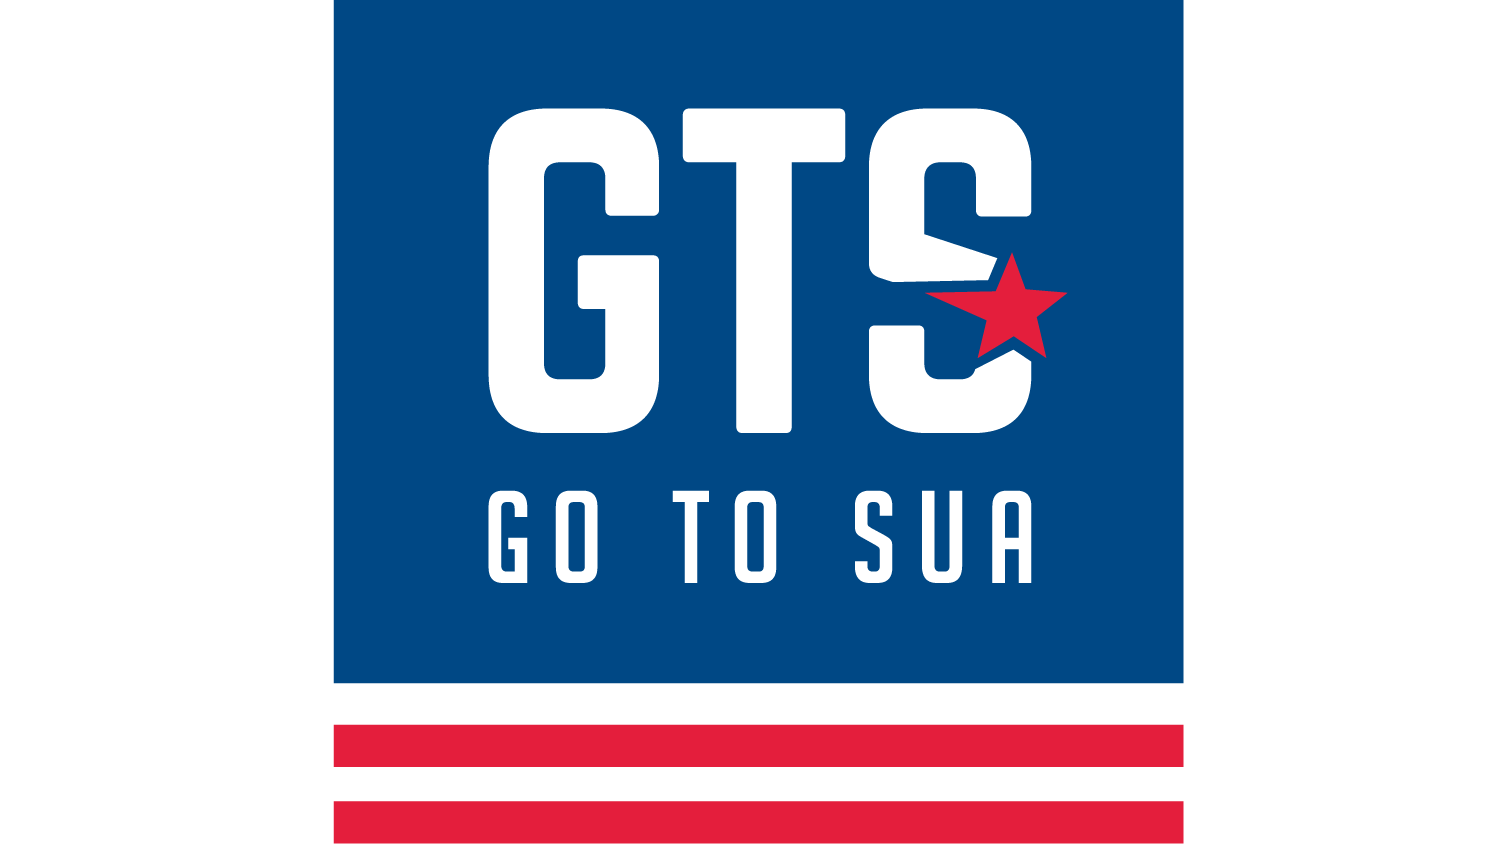 gts work and travel